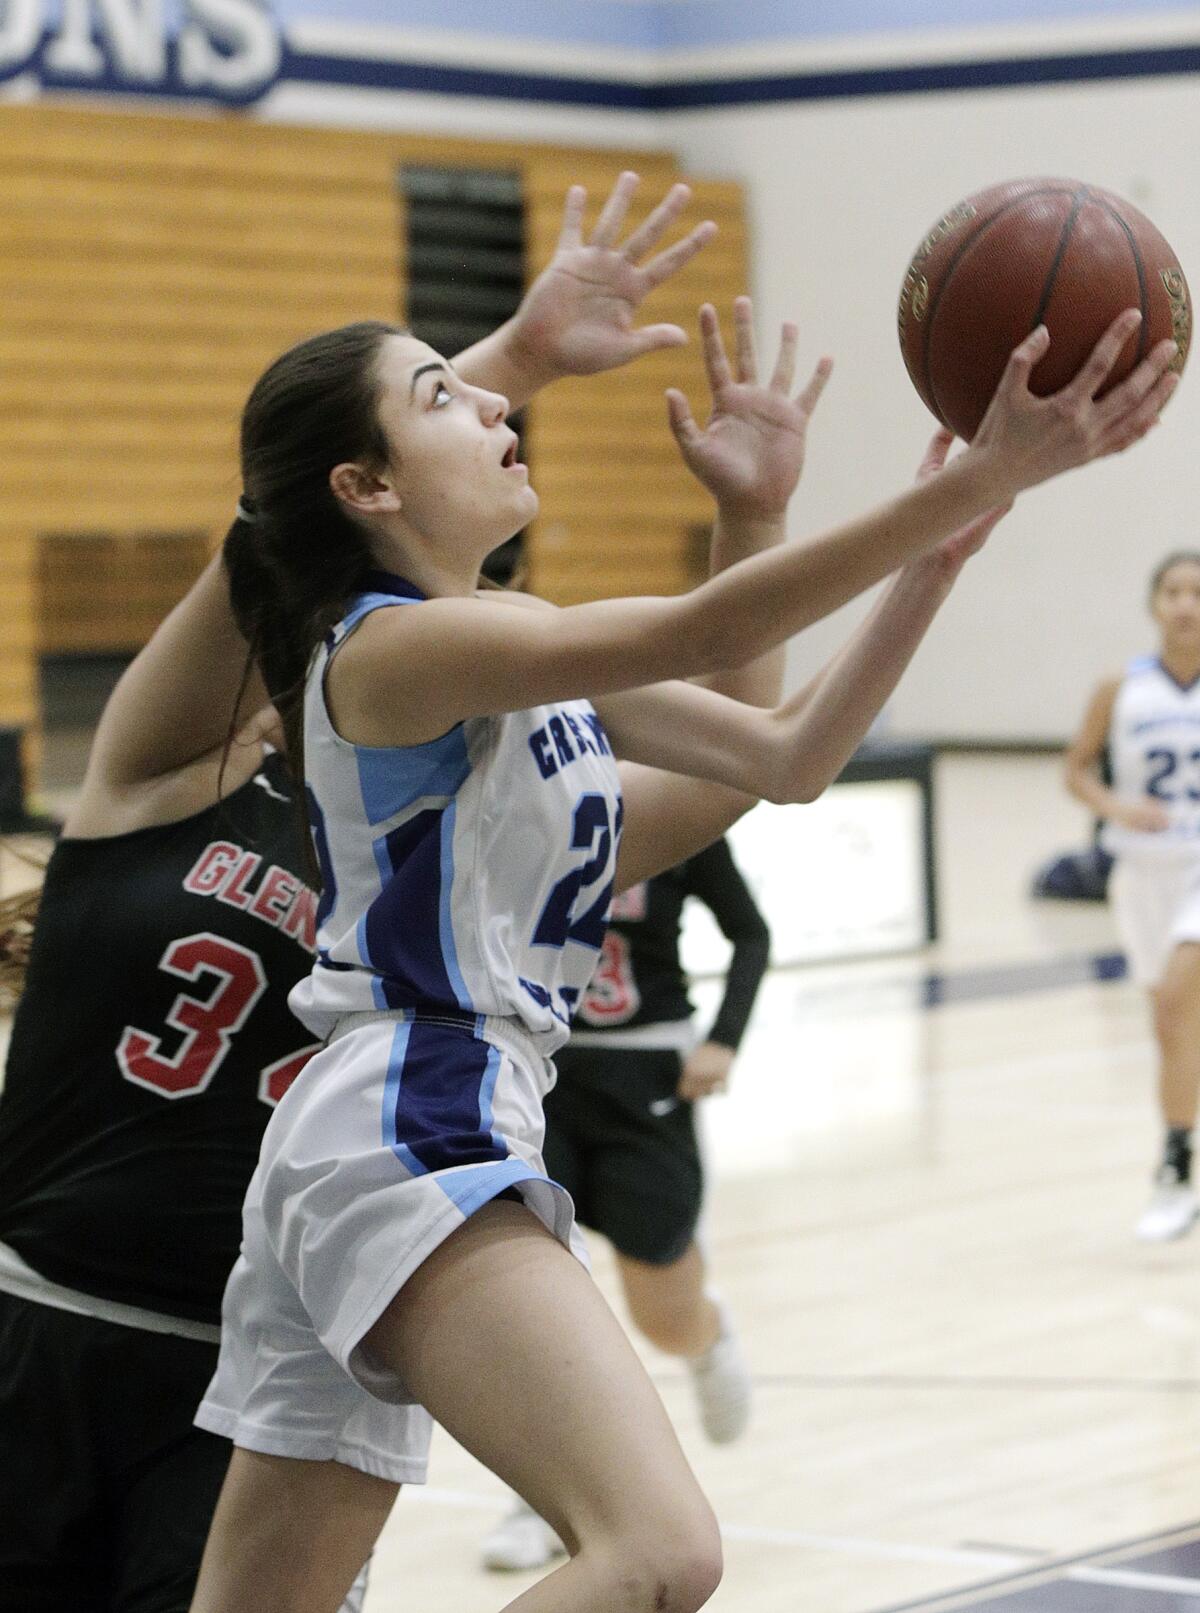 Crescenta Valley's Katrina Minassian drives to shoot after beating Glendale's Melissa Zamora to the basket in a Pacific League girls' basketball game at Crescenta Valley High School on Tuesday, January 7, 2020.